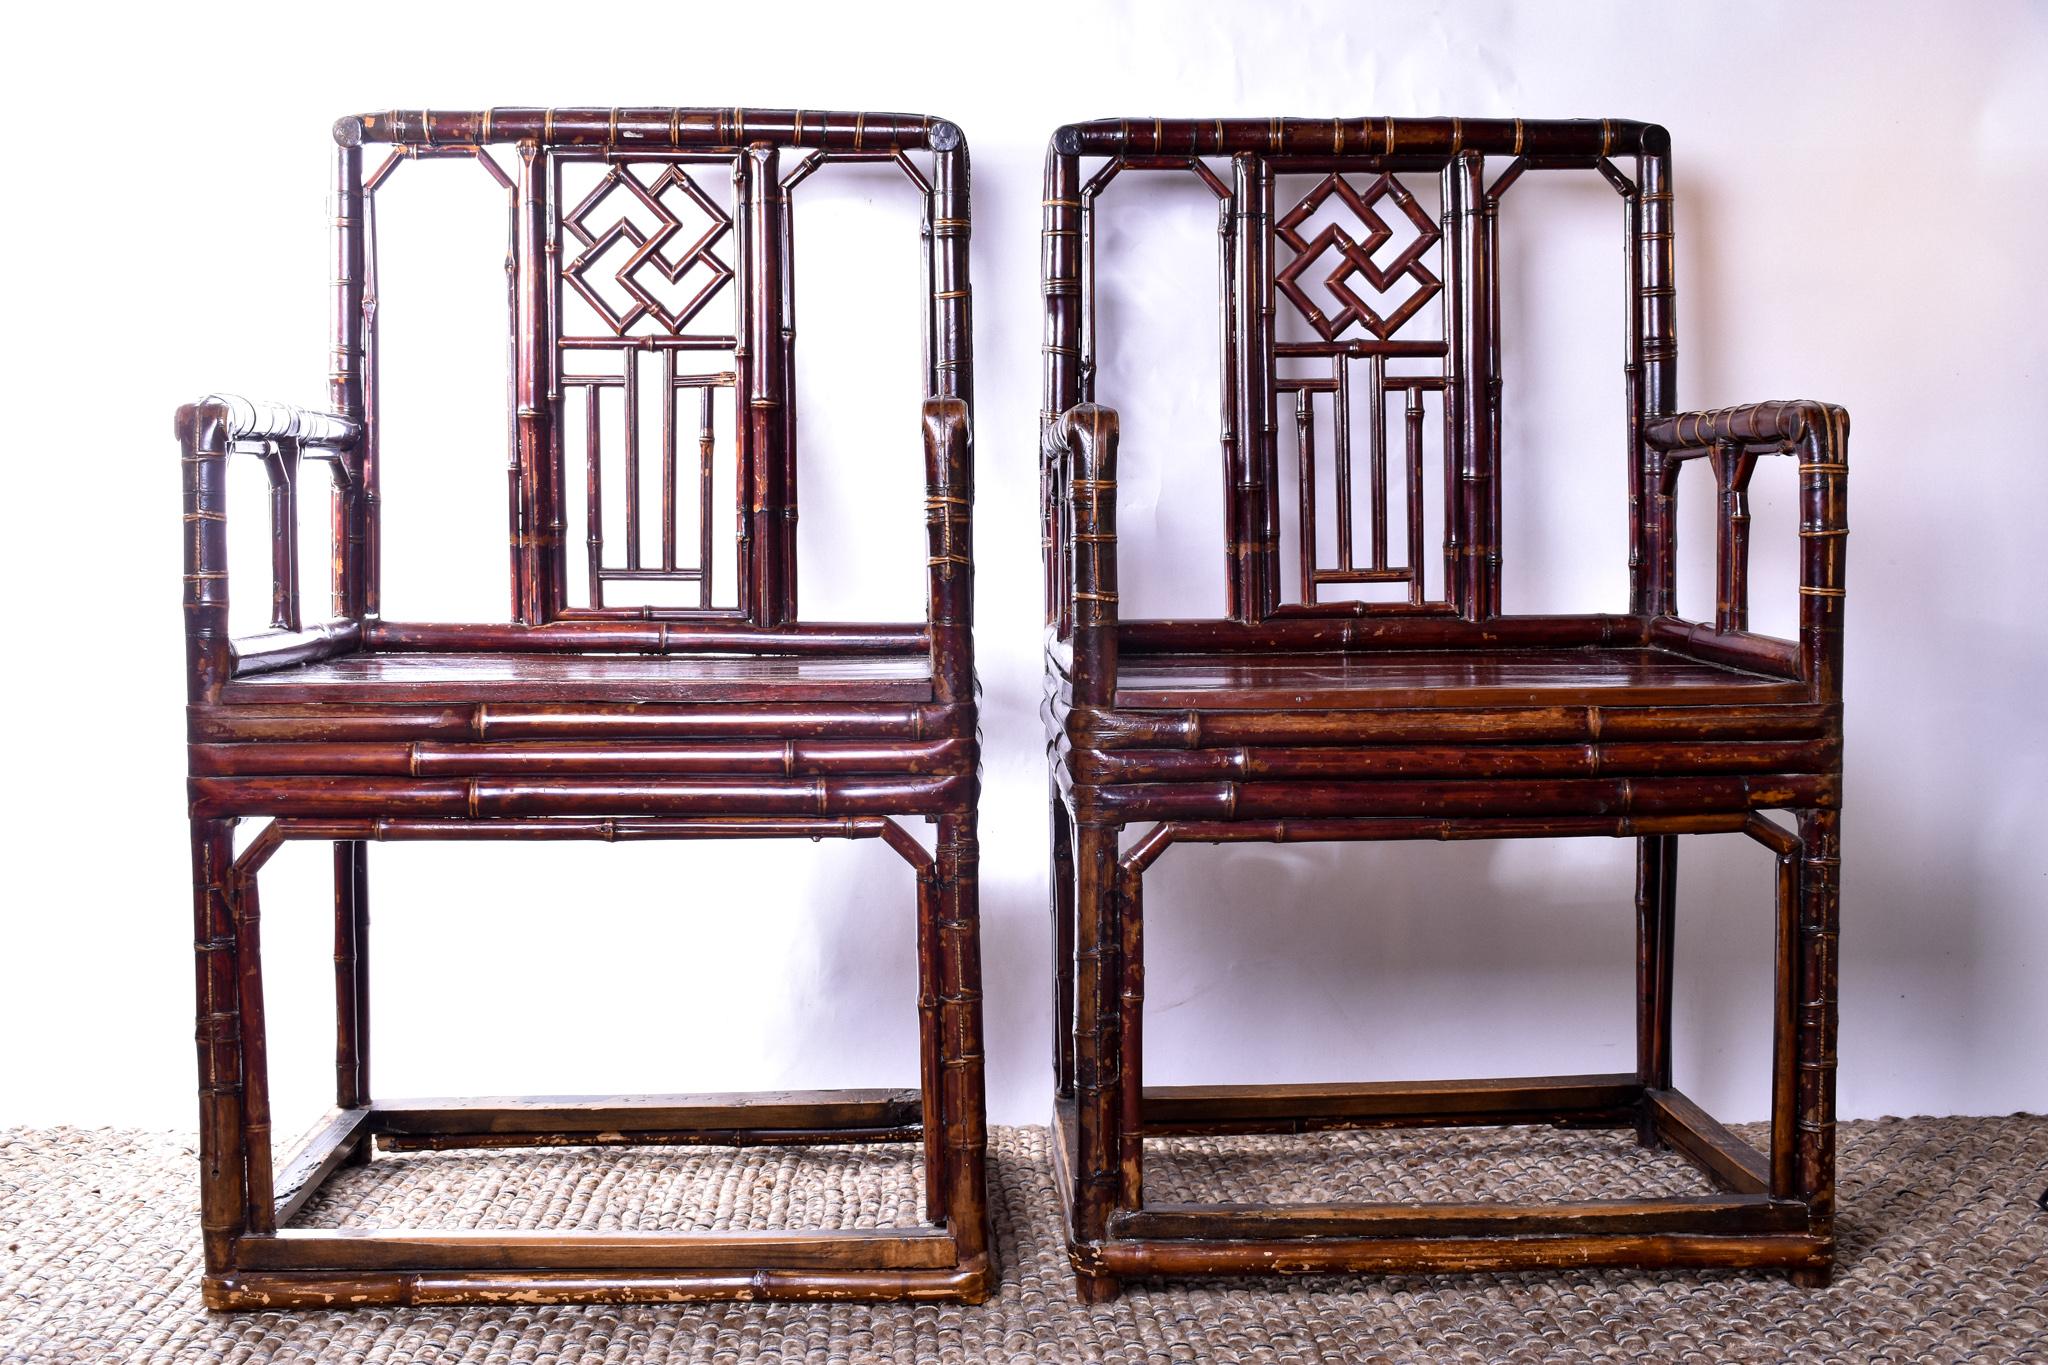 A beautiful pair of late 19th century Chinese Brighton Pavilion style bamboo armchairs, in lovely original condition. Fantastic patina and glow throughout the lacquered finish, truly stunning pair of chairs.